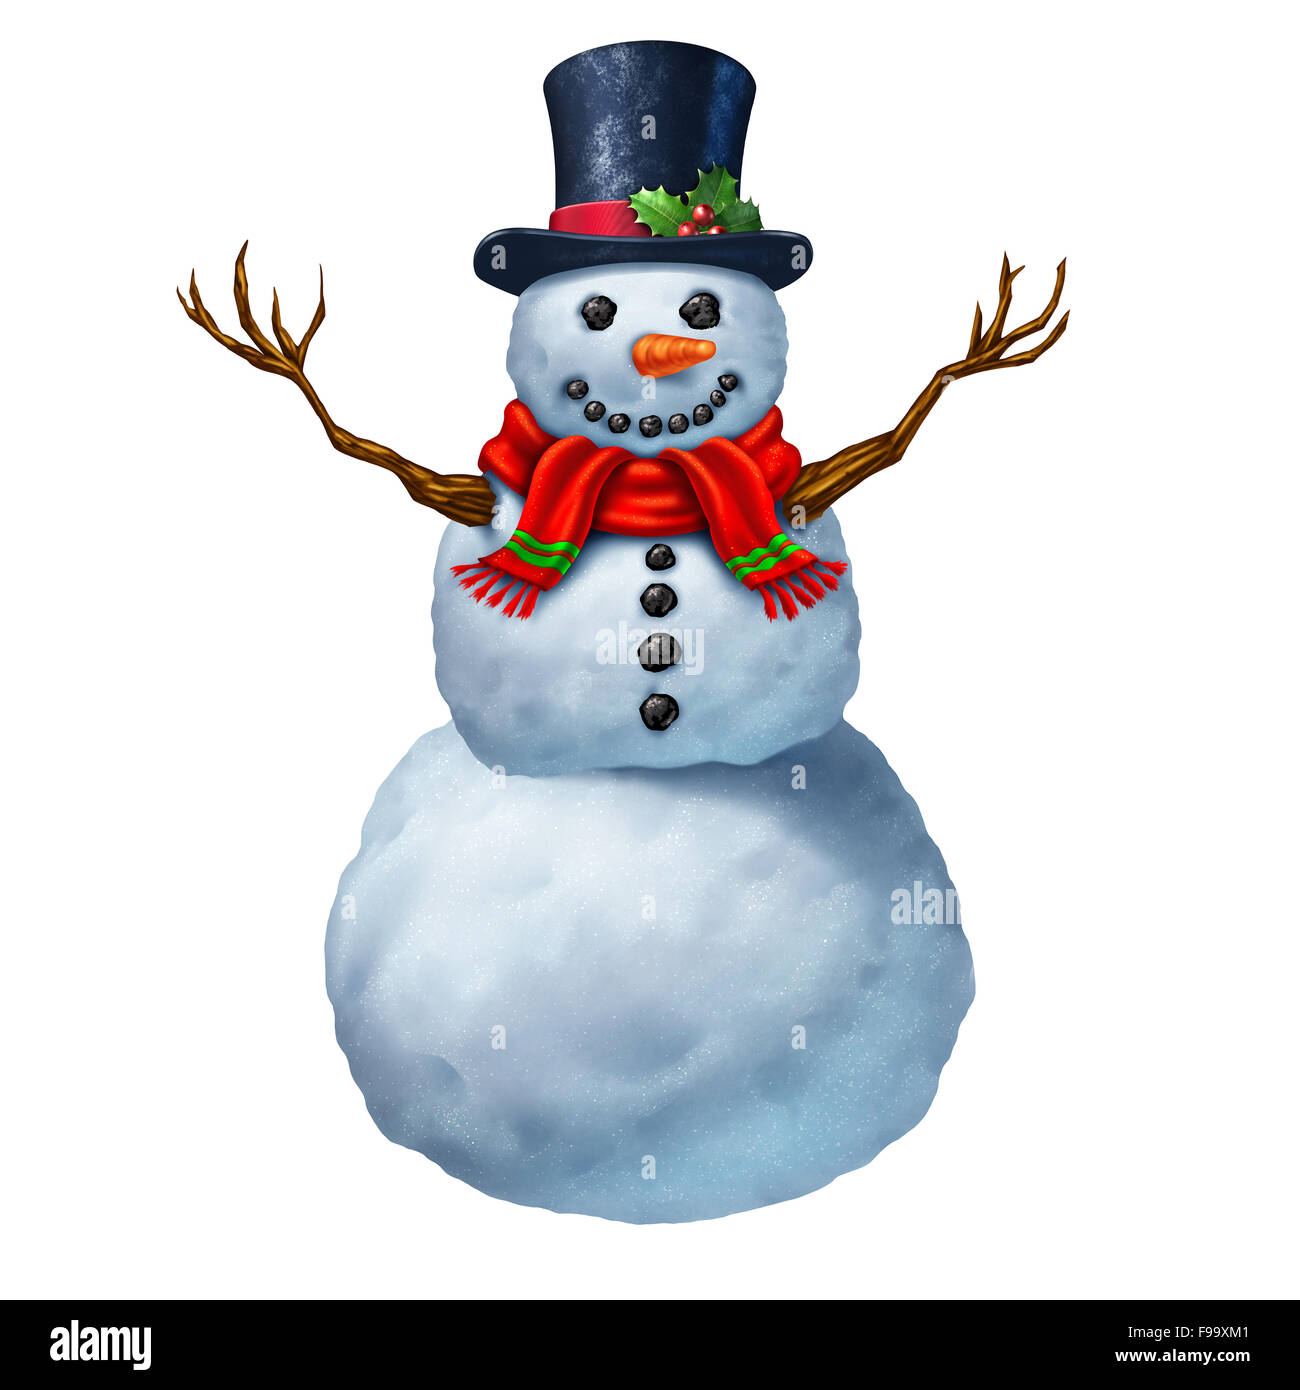 Snowman character isolated on a white background as a traditional magical winter celebration icon and festive seasonal symbol for snowing and snow fall play activity. Stock Photo